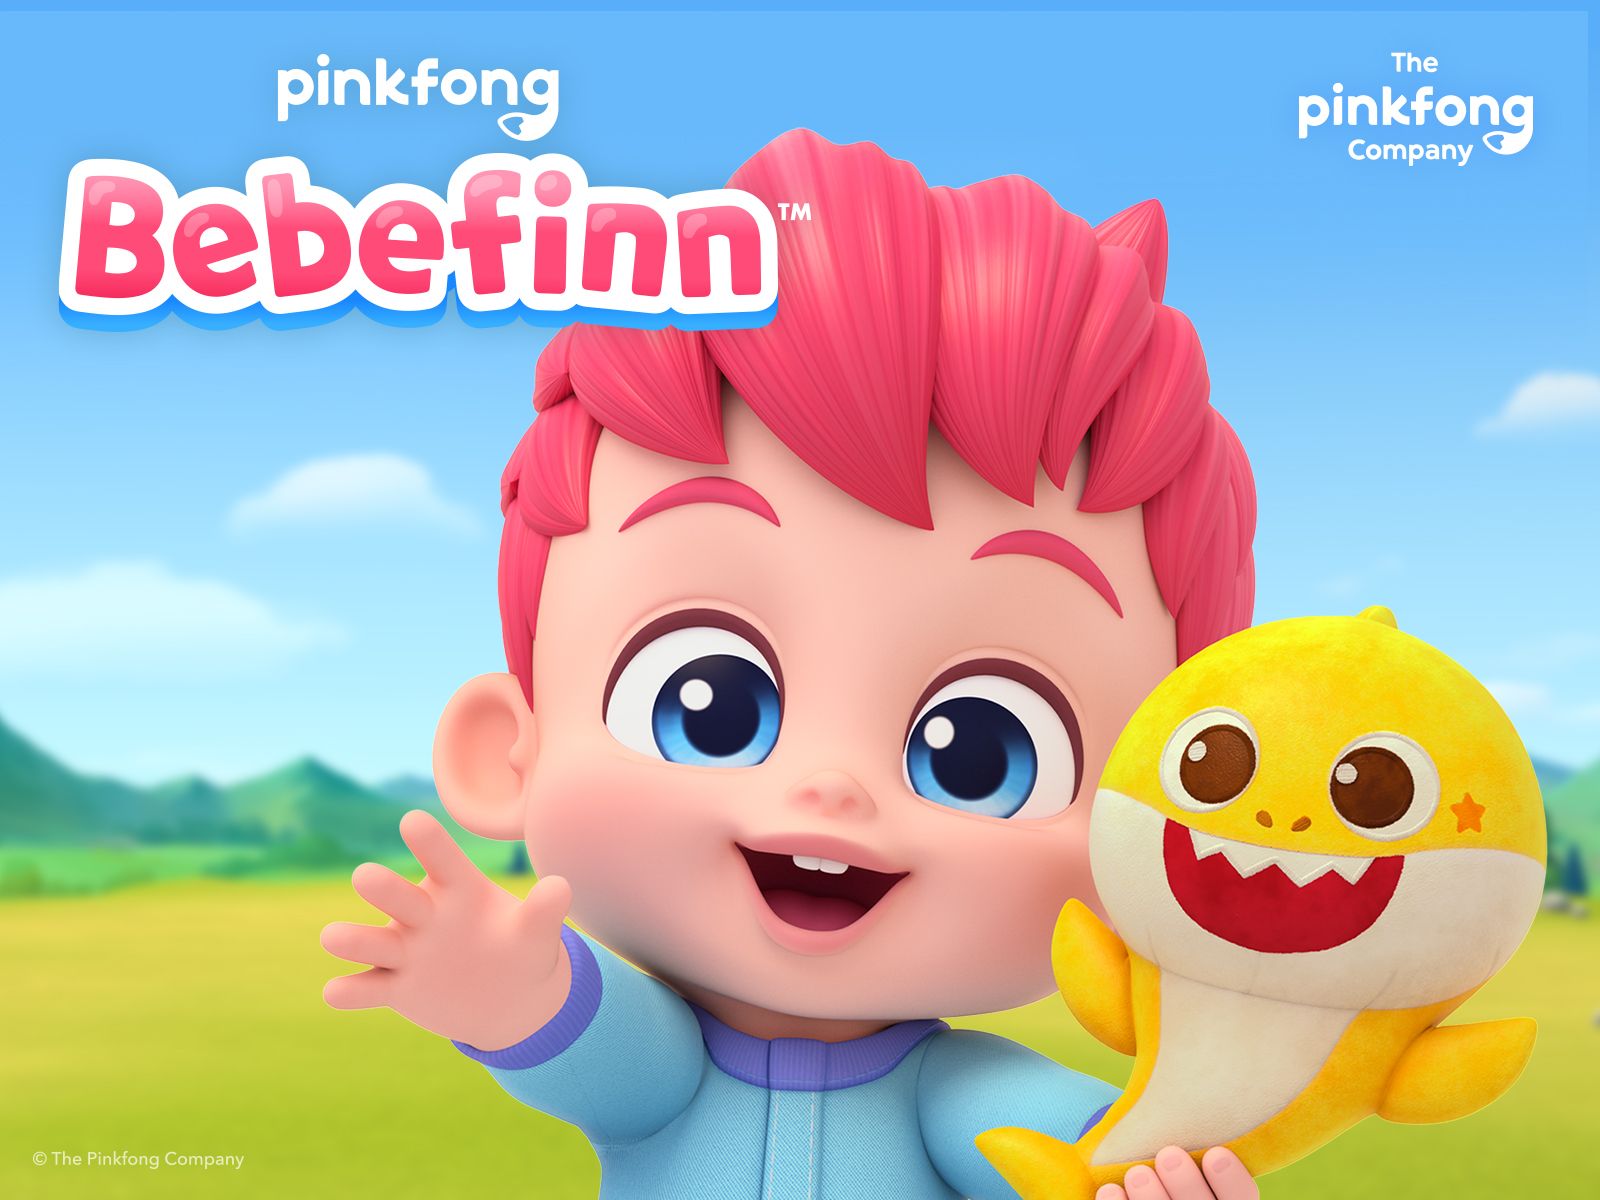 Pinkfong Sweeps Netflix with Bebefinn, Becoming No.1 in Today Top 10 Kids  Series in the U.S.